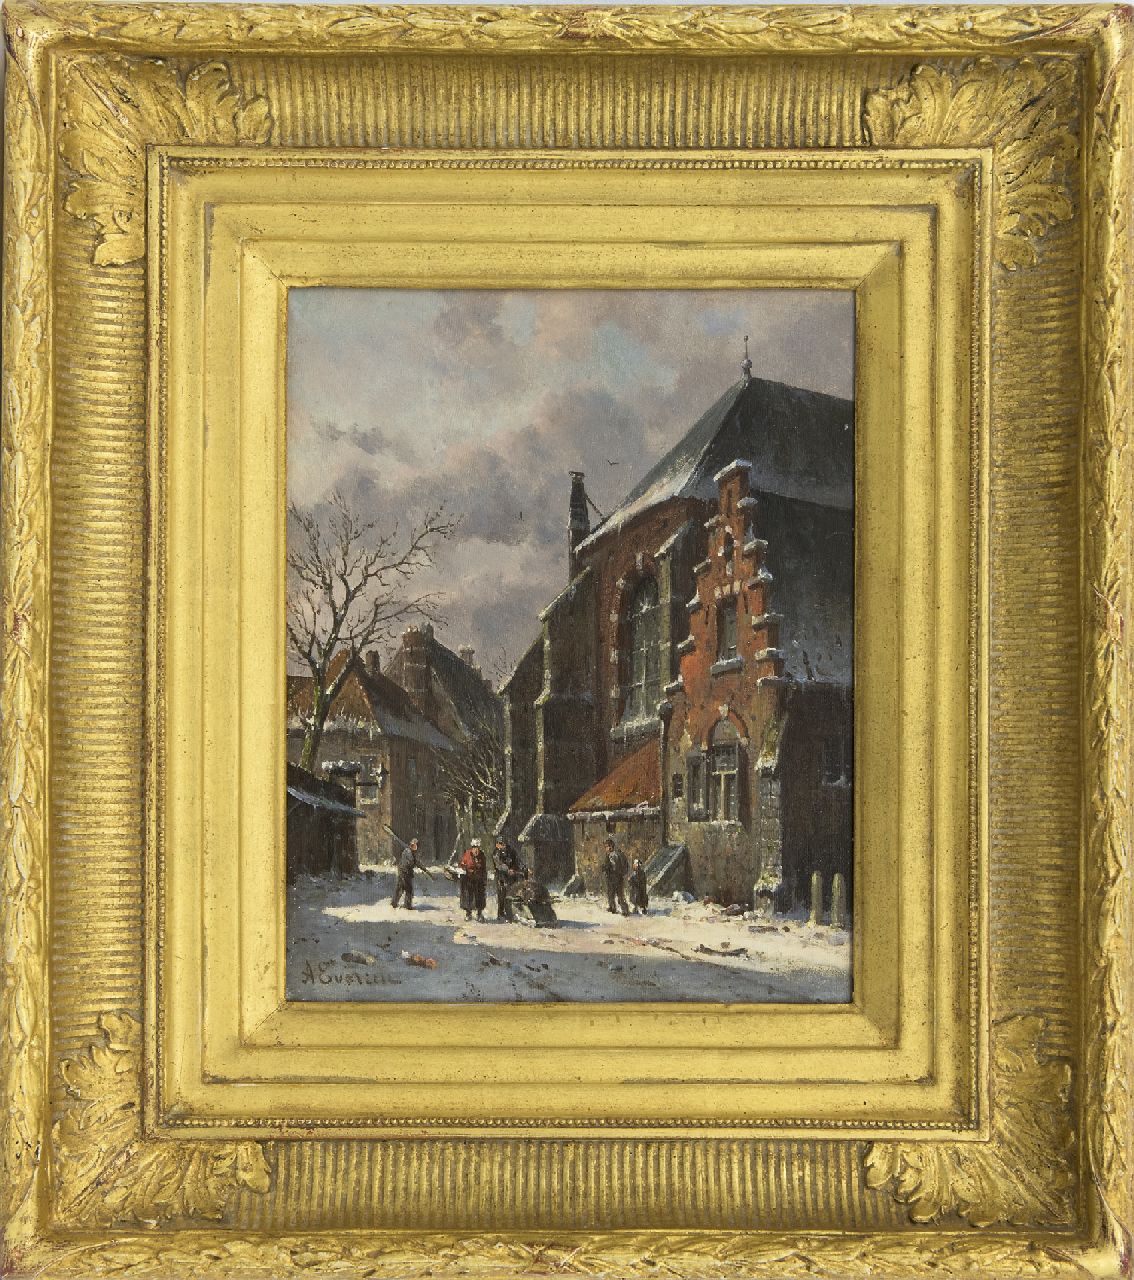 Eversen A.  | Adrianus Eversen, A town in winter with figures, oil on panel 25.0 x 19.5 cm, signed l.l.